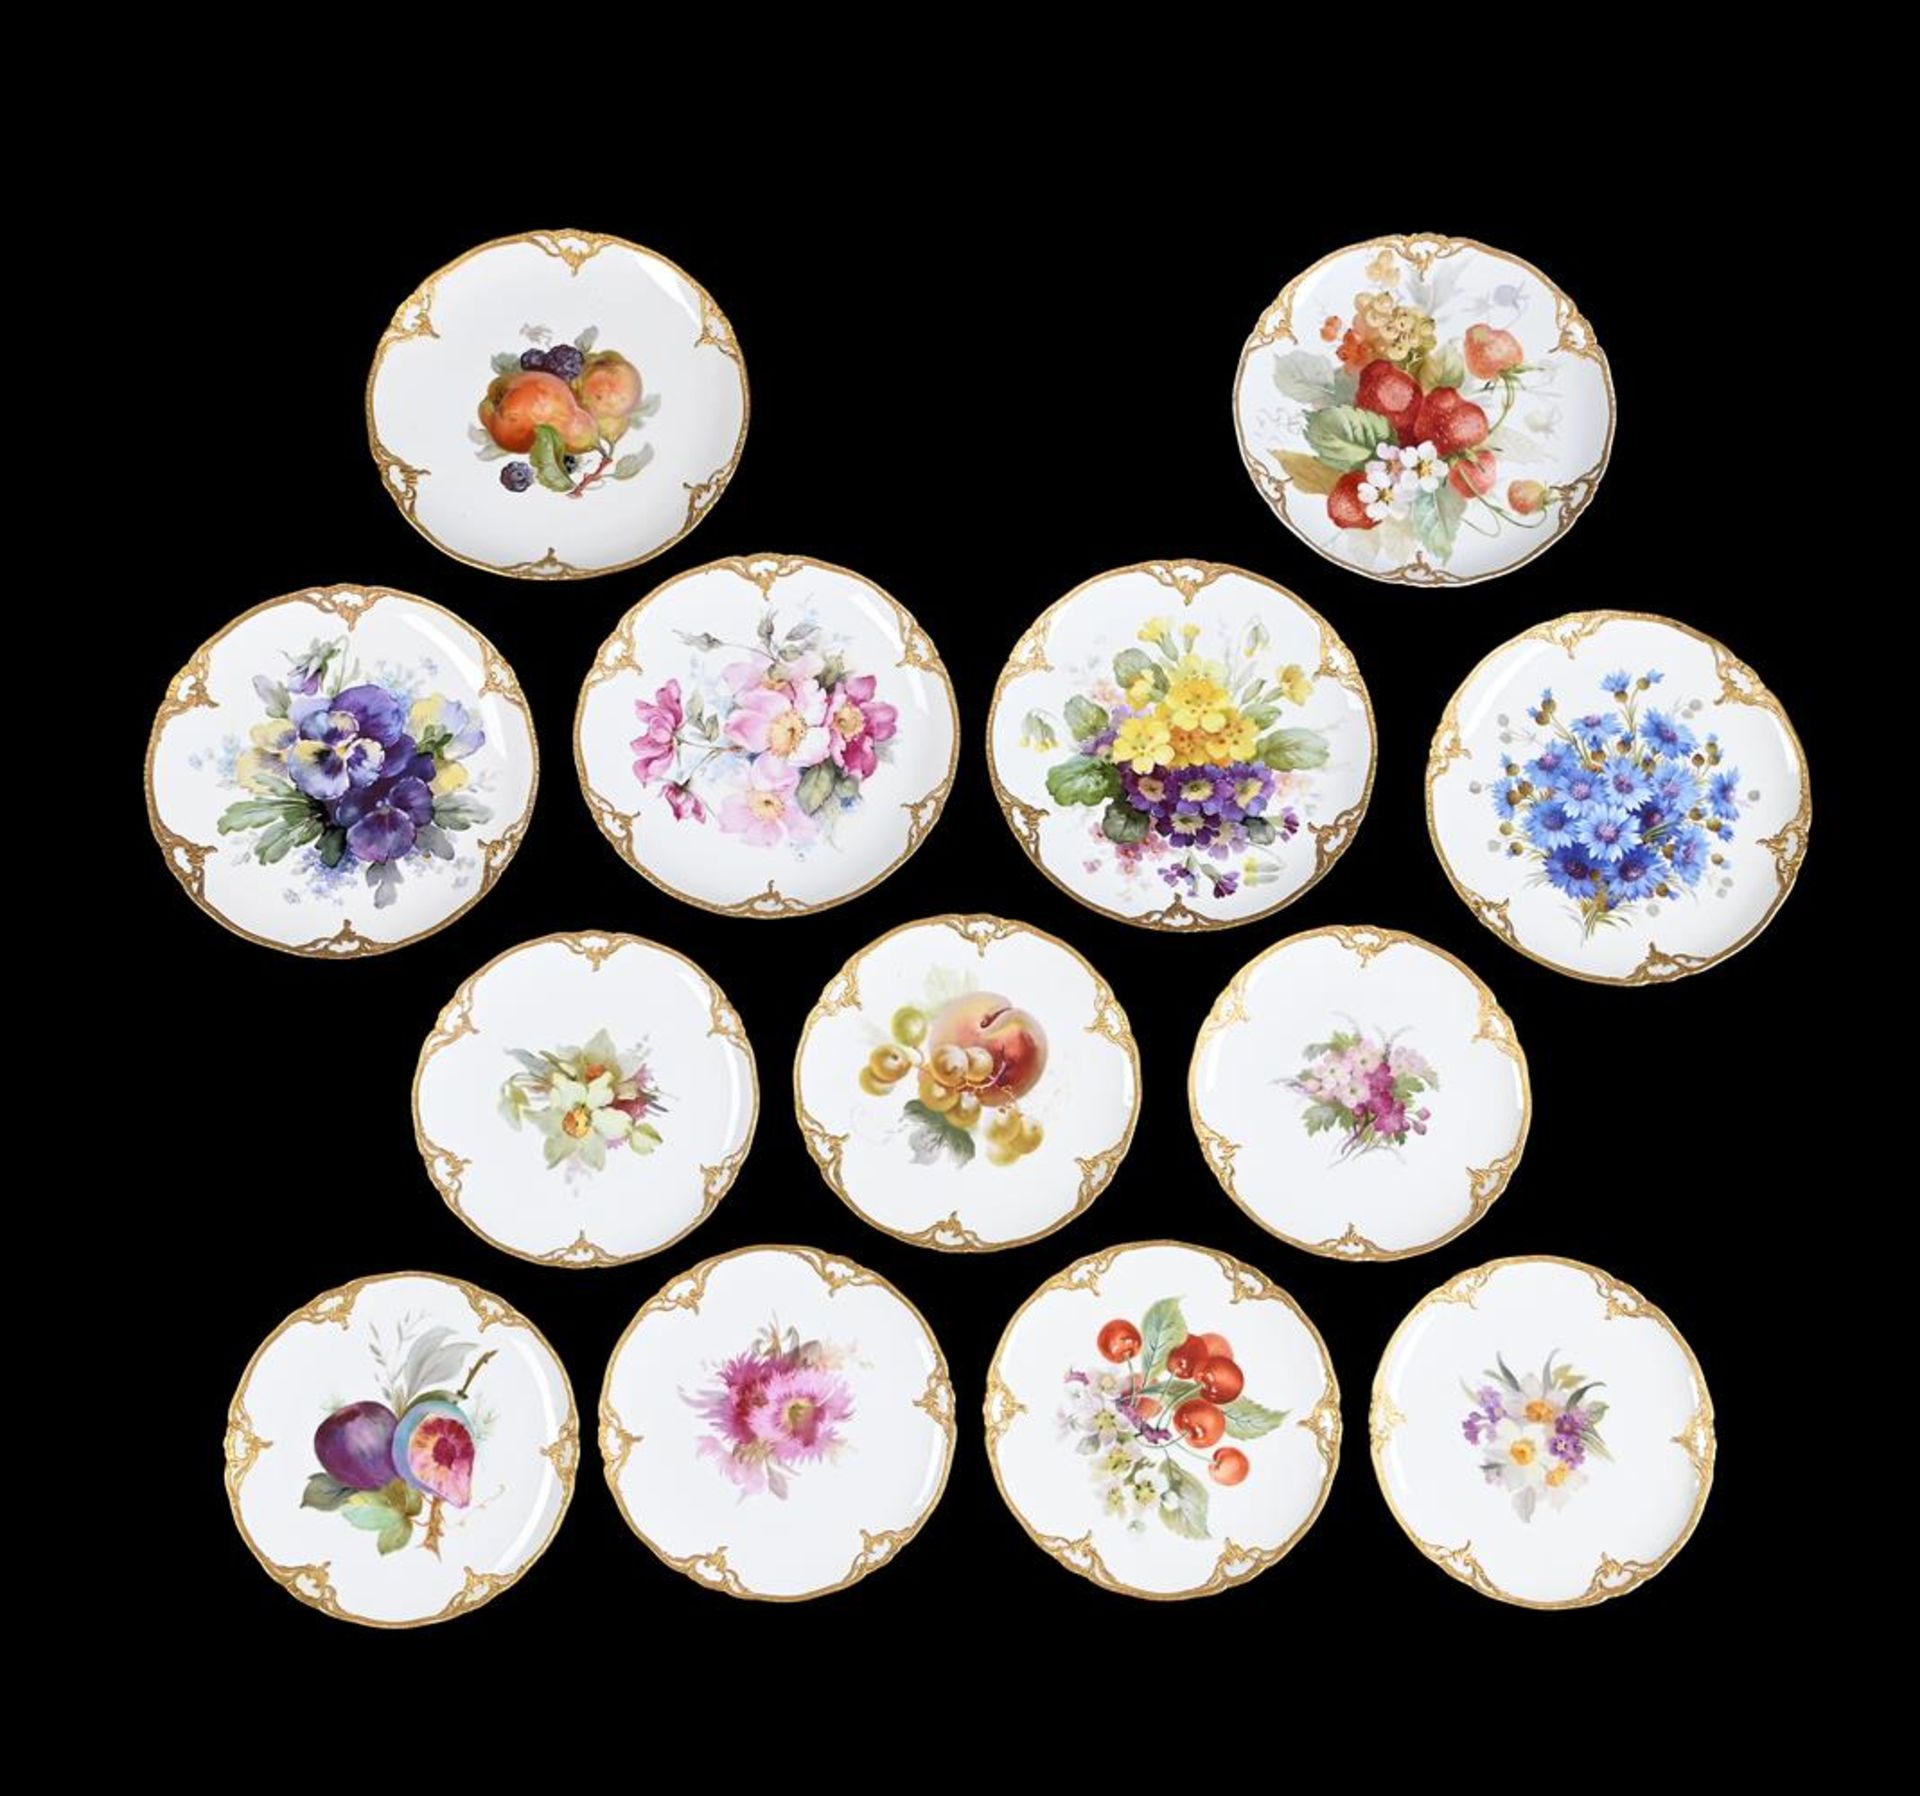 FIVE BERLIN (K.P.M.) PLATES AND EIGHT BERLIN (OUTSIDE DECORATED) PLATESCIRCA 1890-1905 in two size